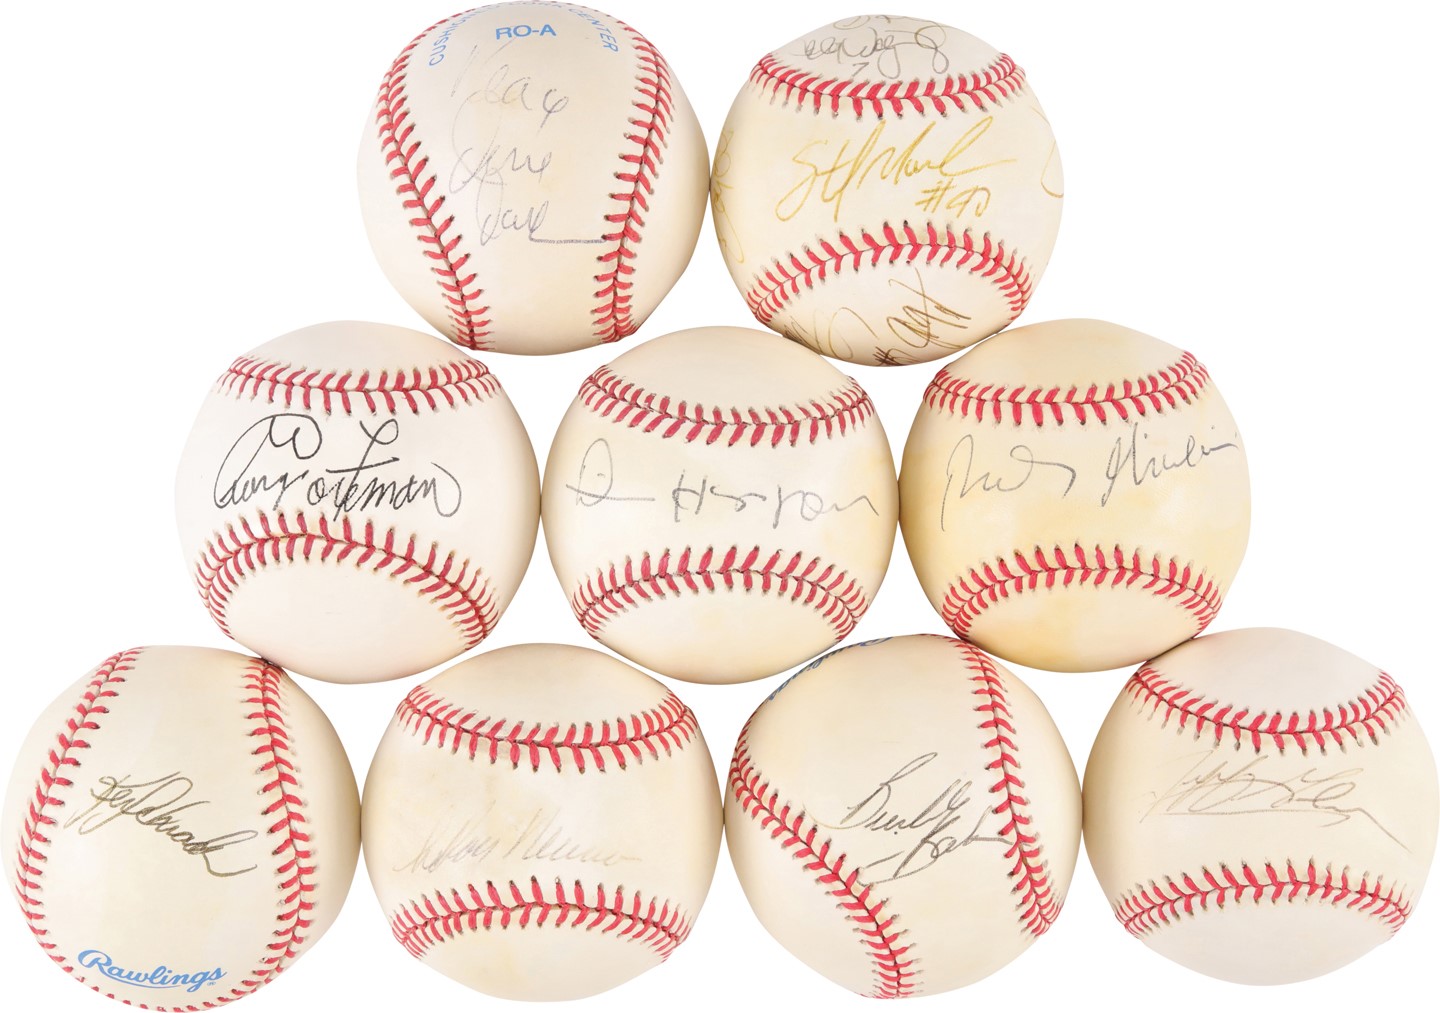 - Pop Culture and Multi-Sport Signed Baseball Collection (9)